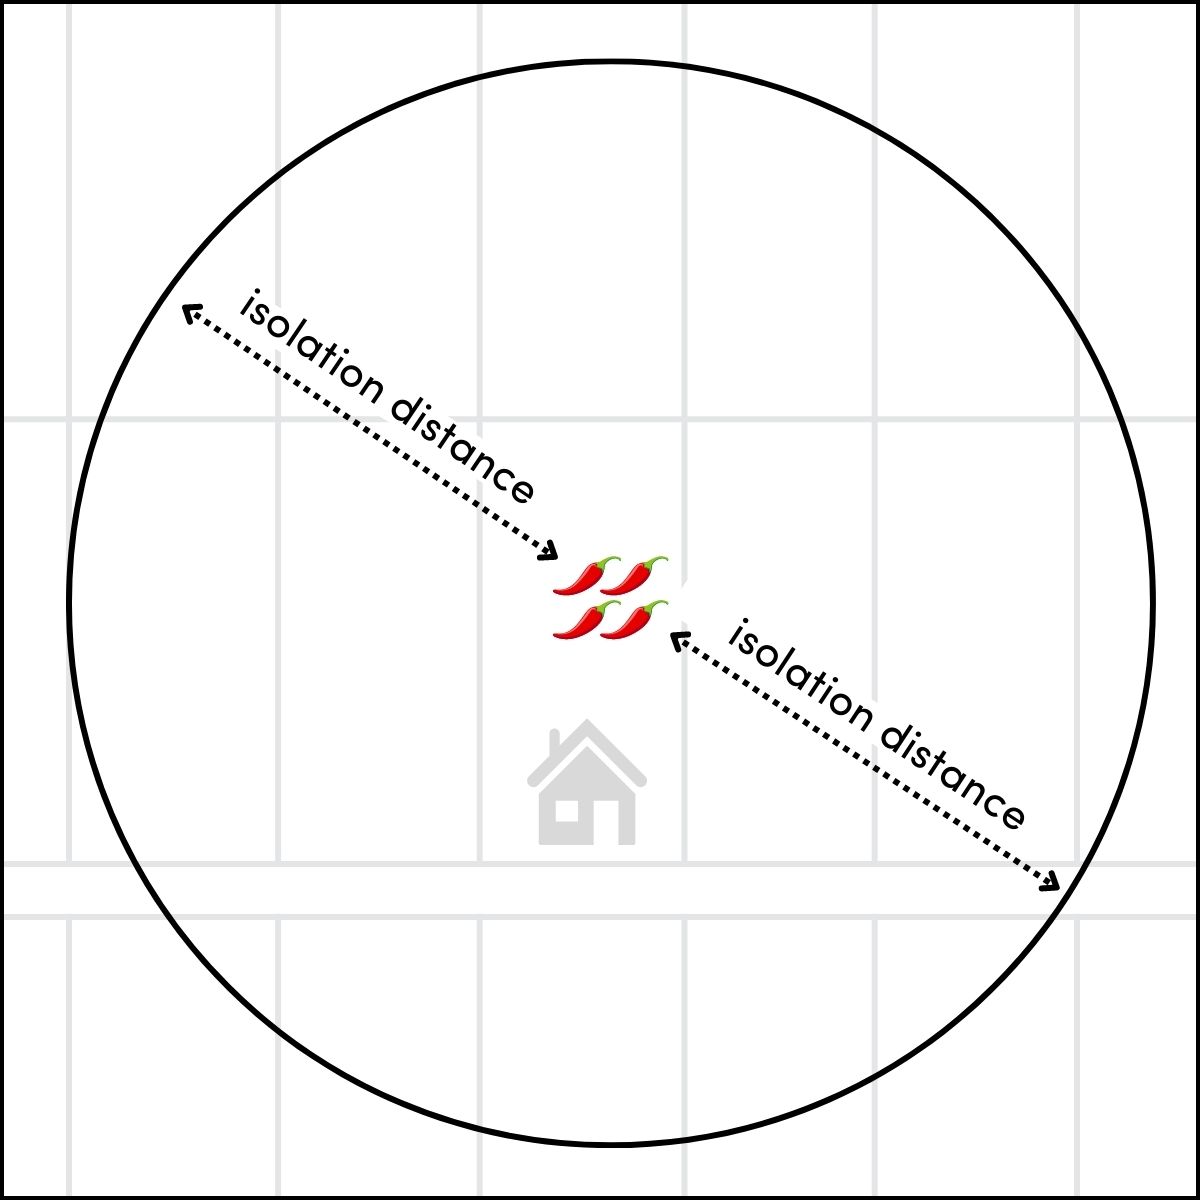 A diagram showing the isolation distance measured in all directions from four chilli plants. The isolation distance becomes the radius of a circle with the chilli plants in the centre.